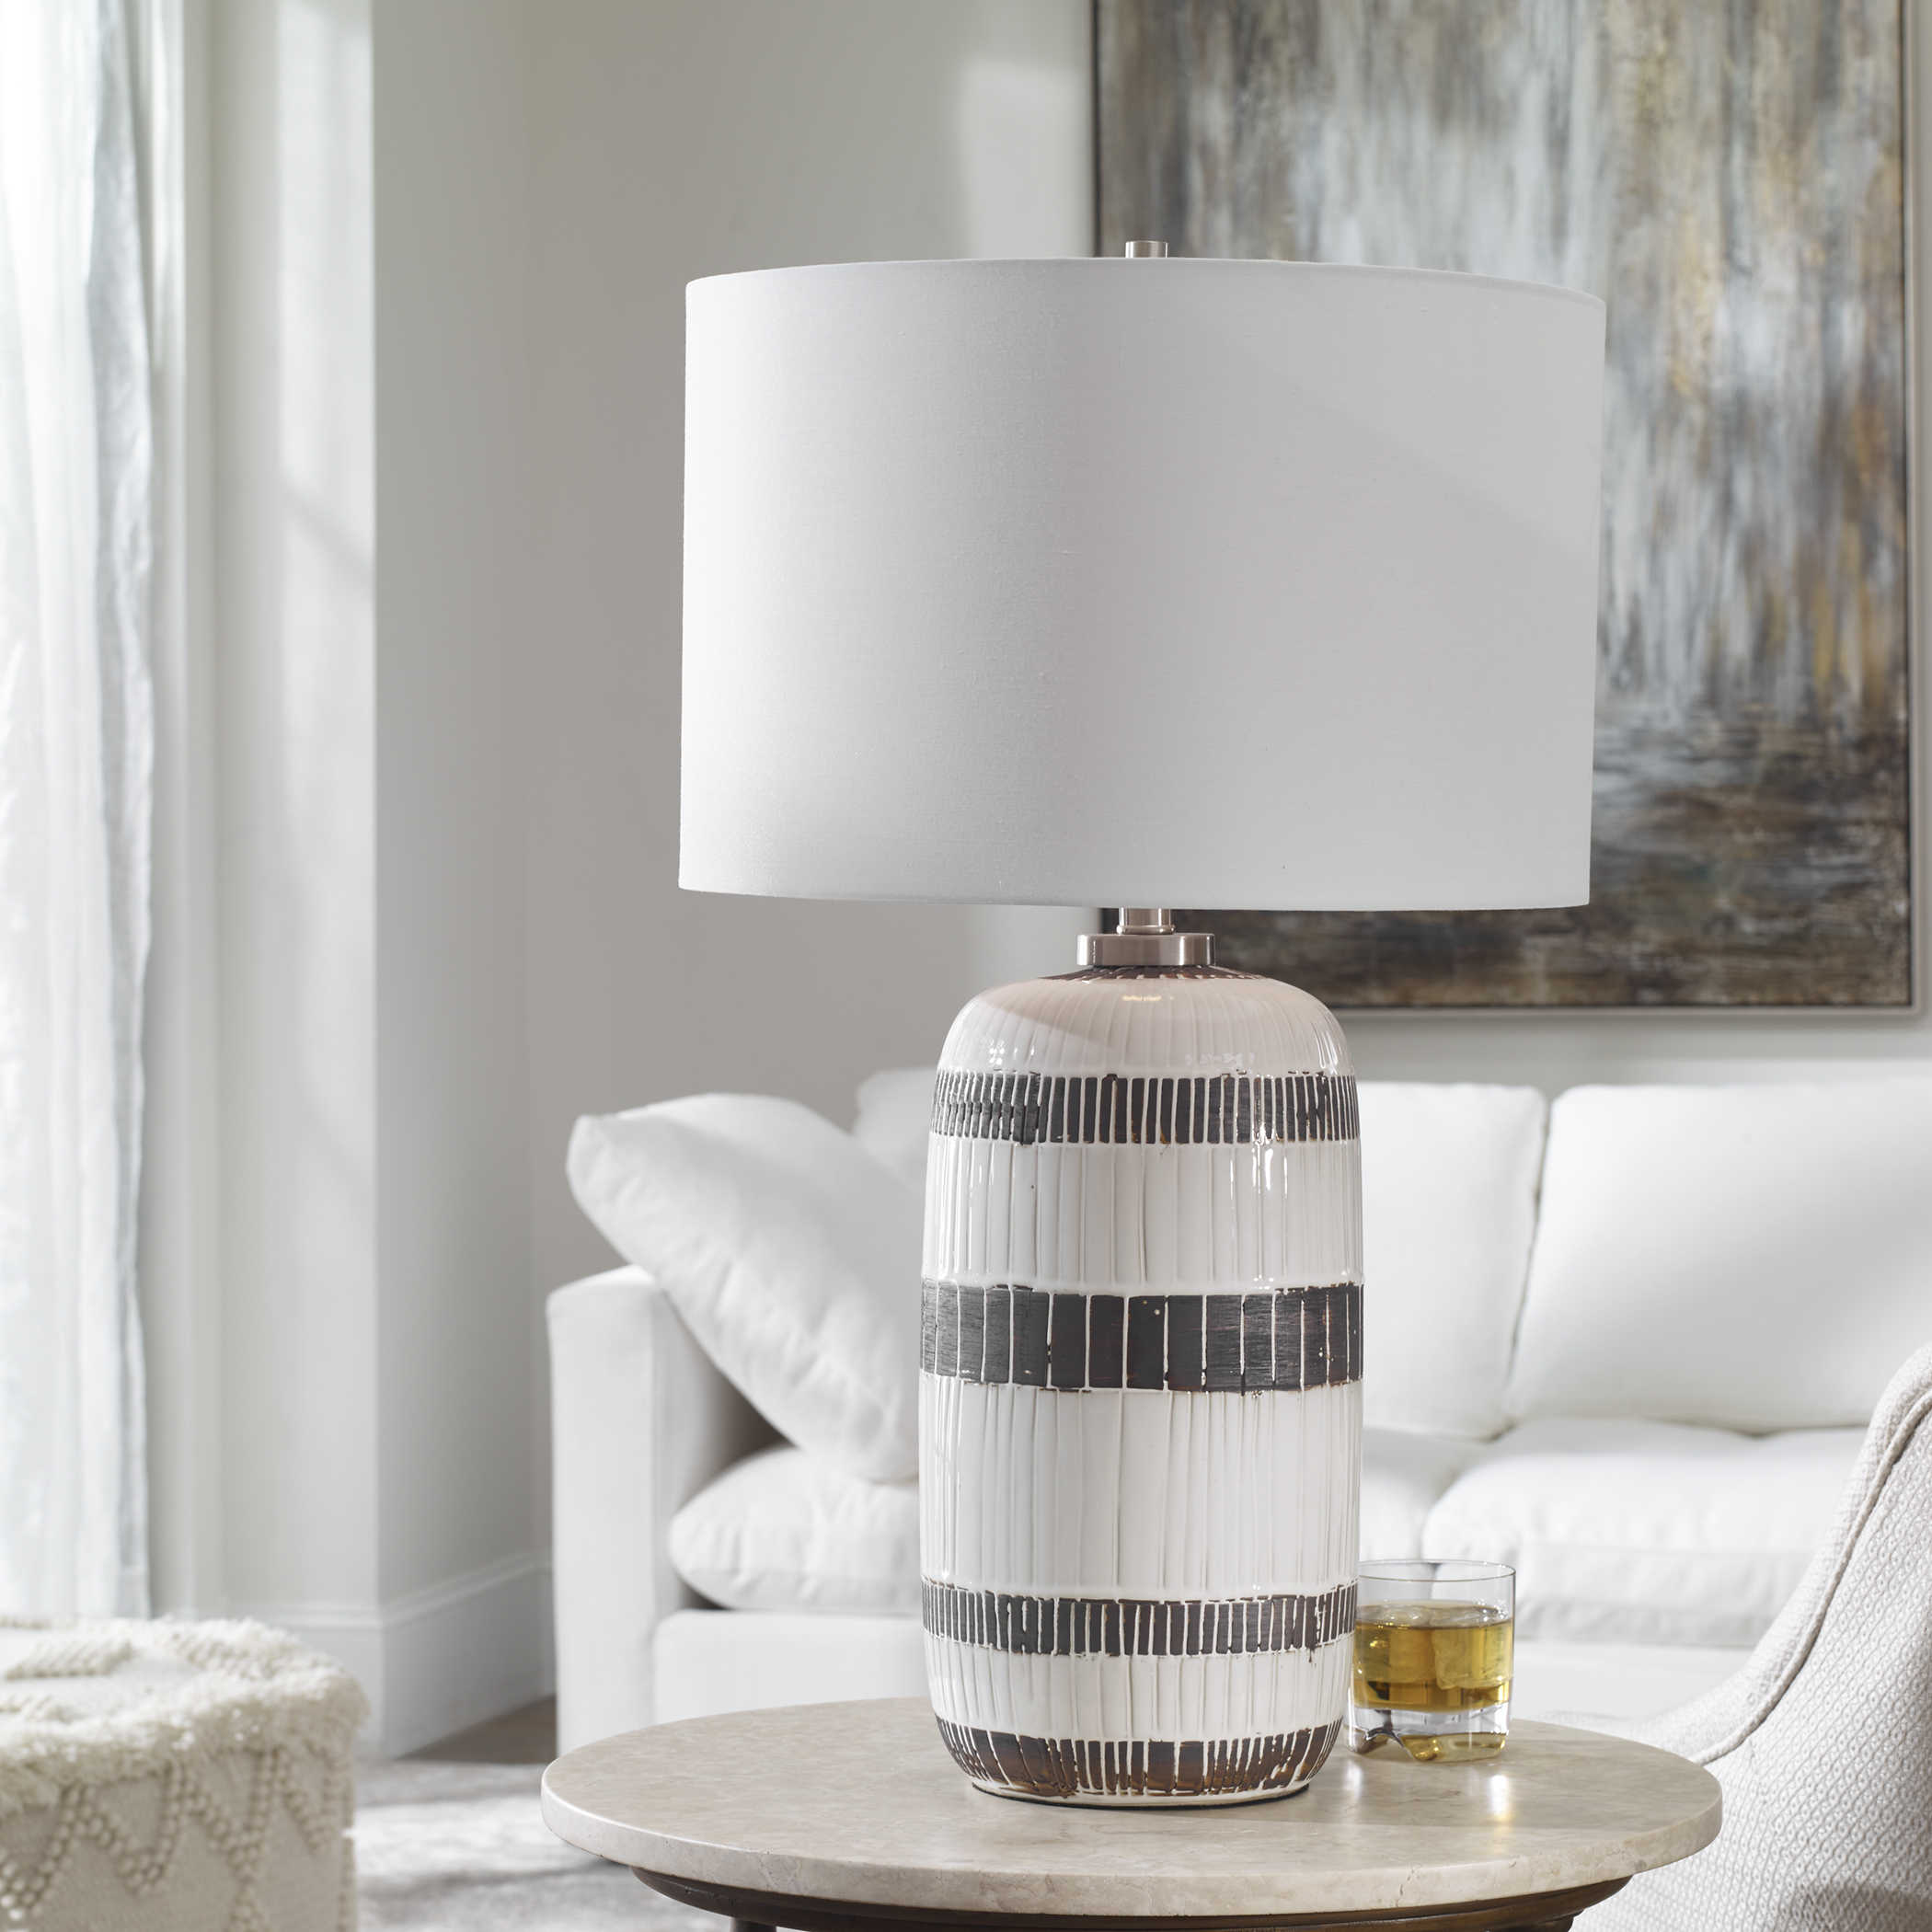 2022-color-trend-neutral-table-lamp